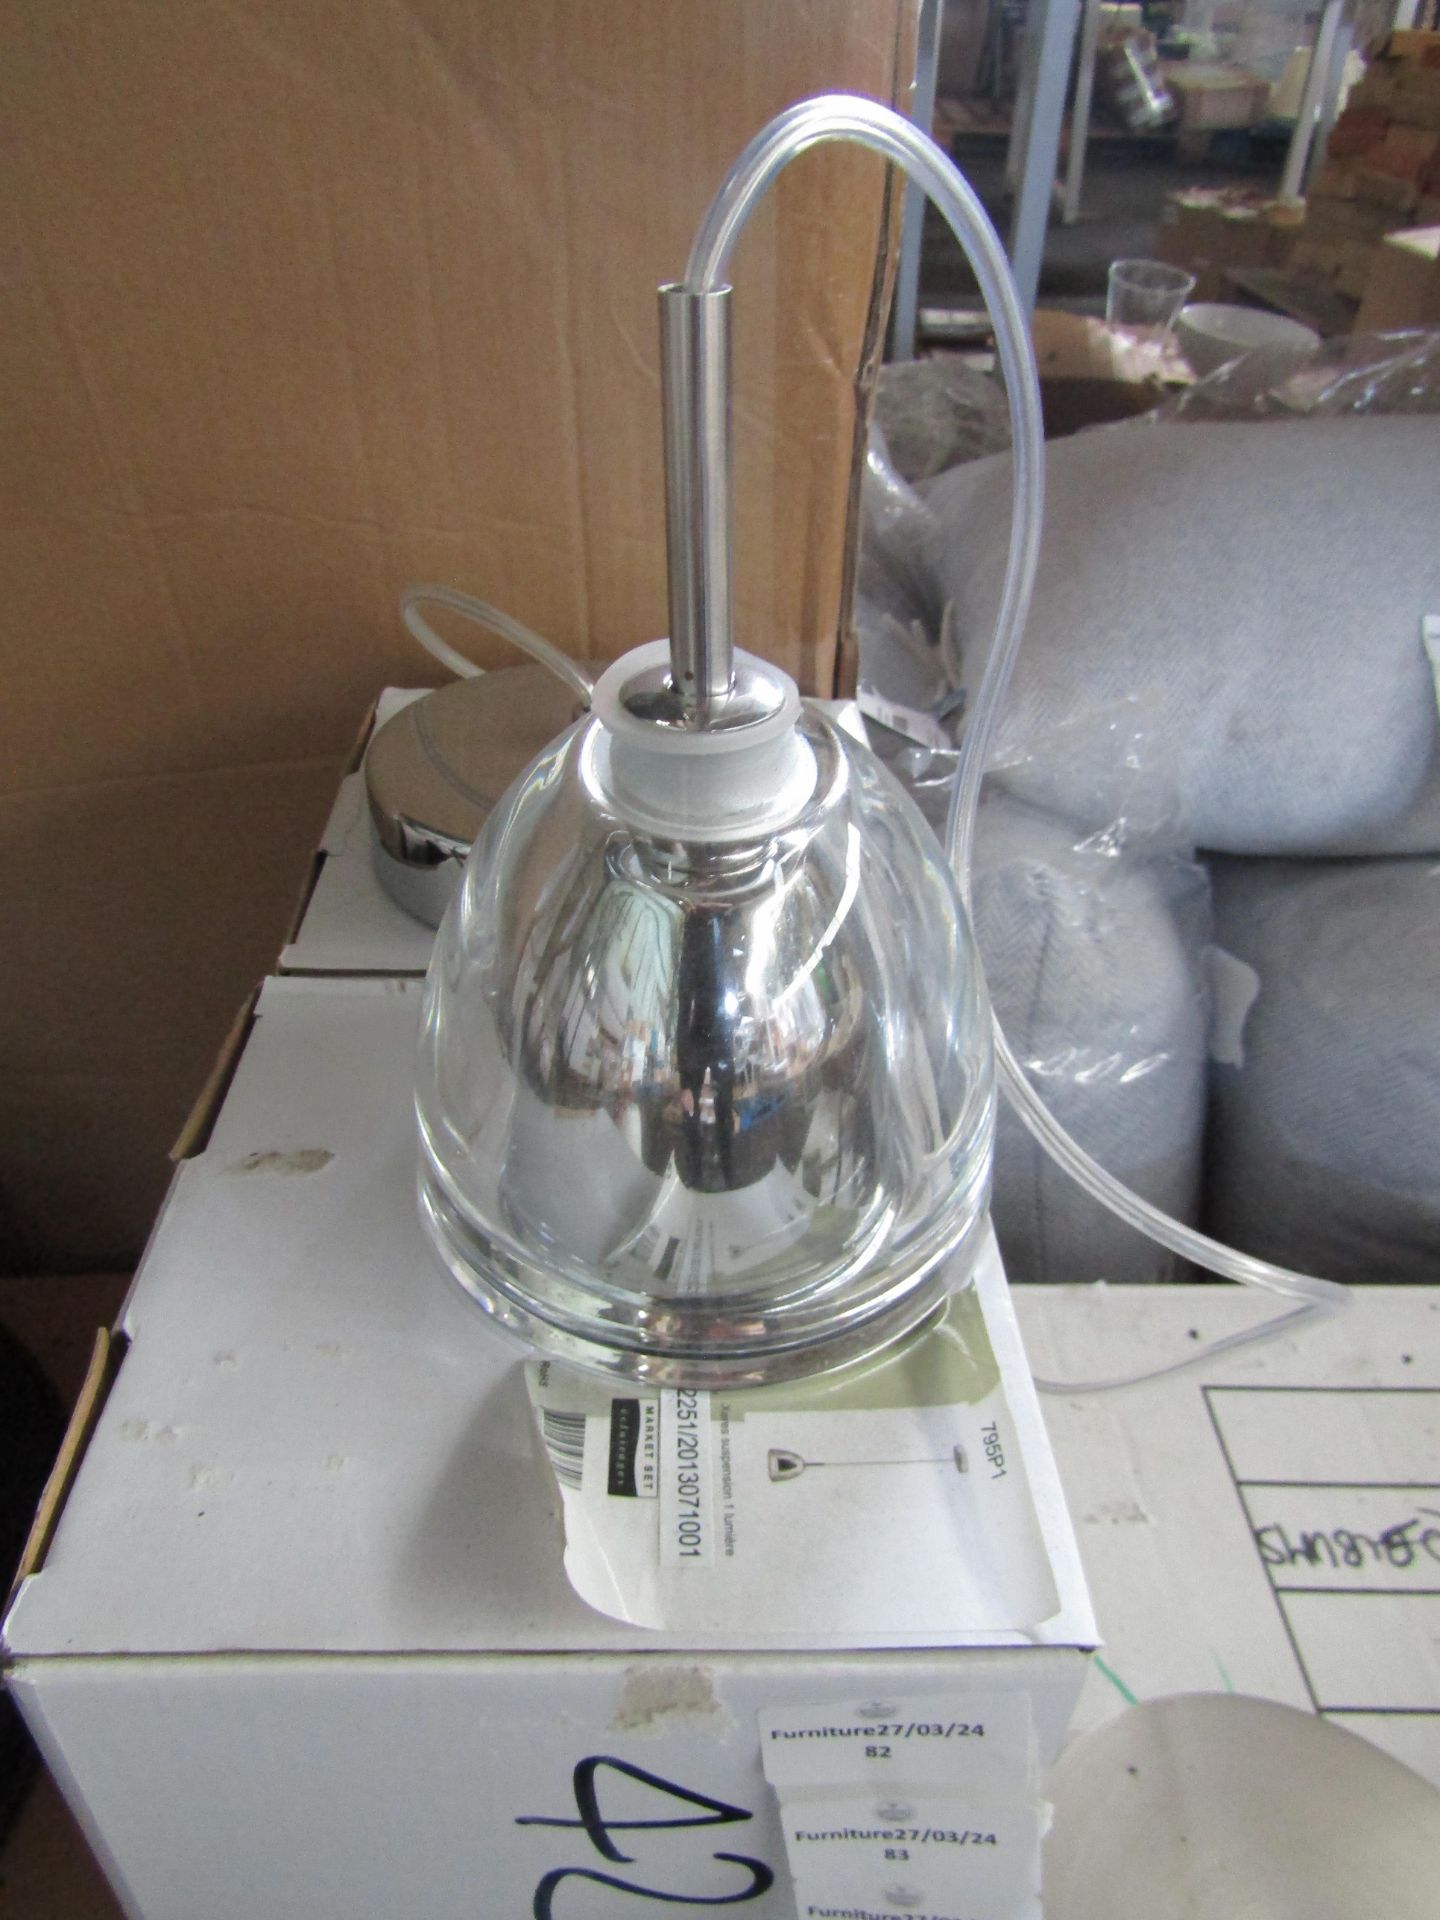 Nickel & Glass Dome Pendant Light. Size: H100 x D11.7cm - RRP œ174.00 - New & Boxed.